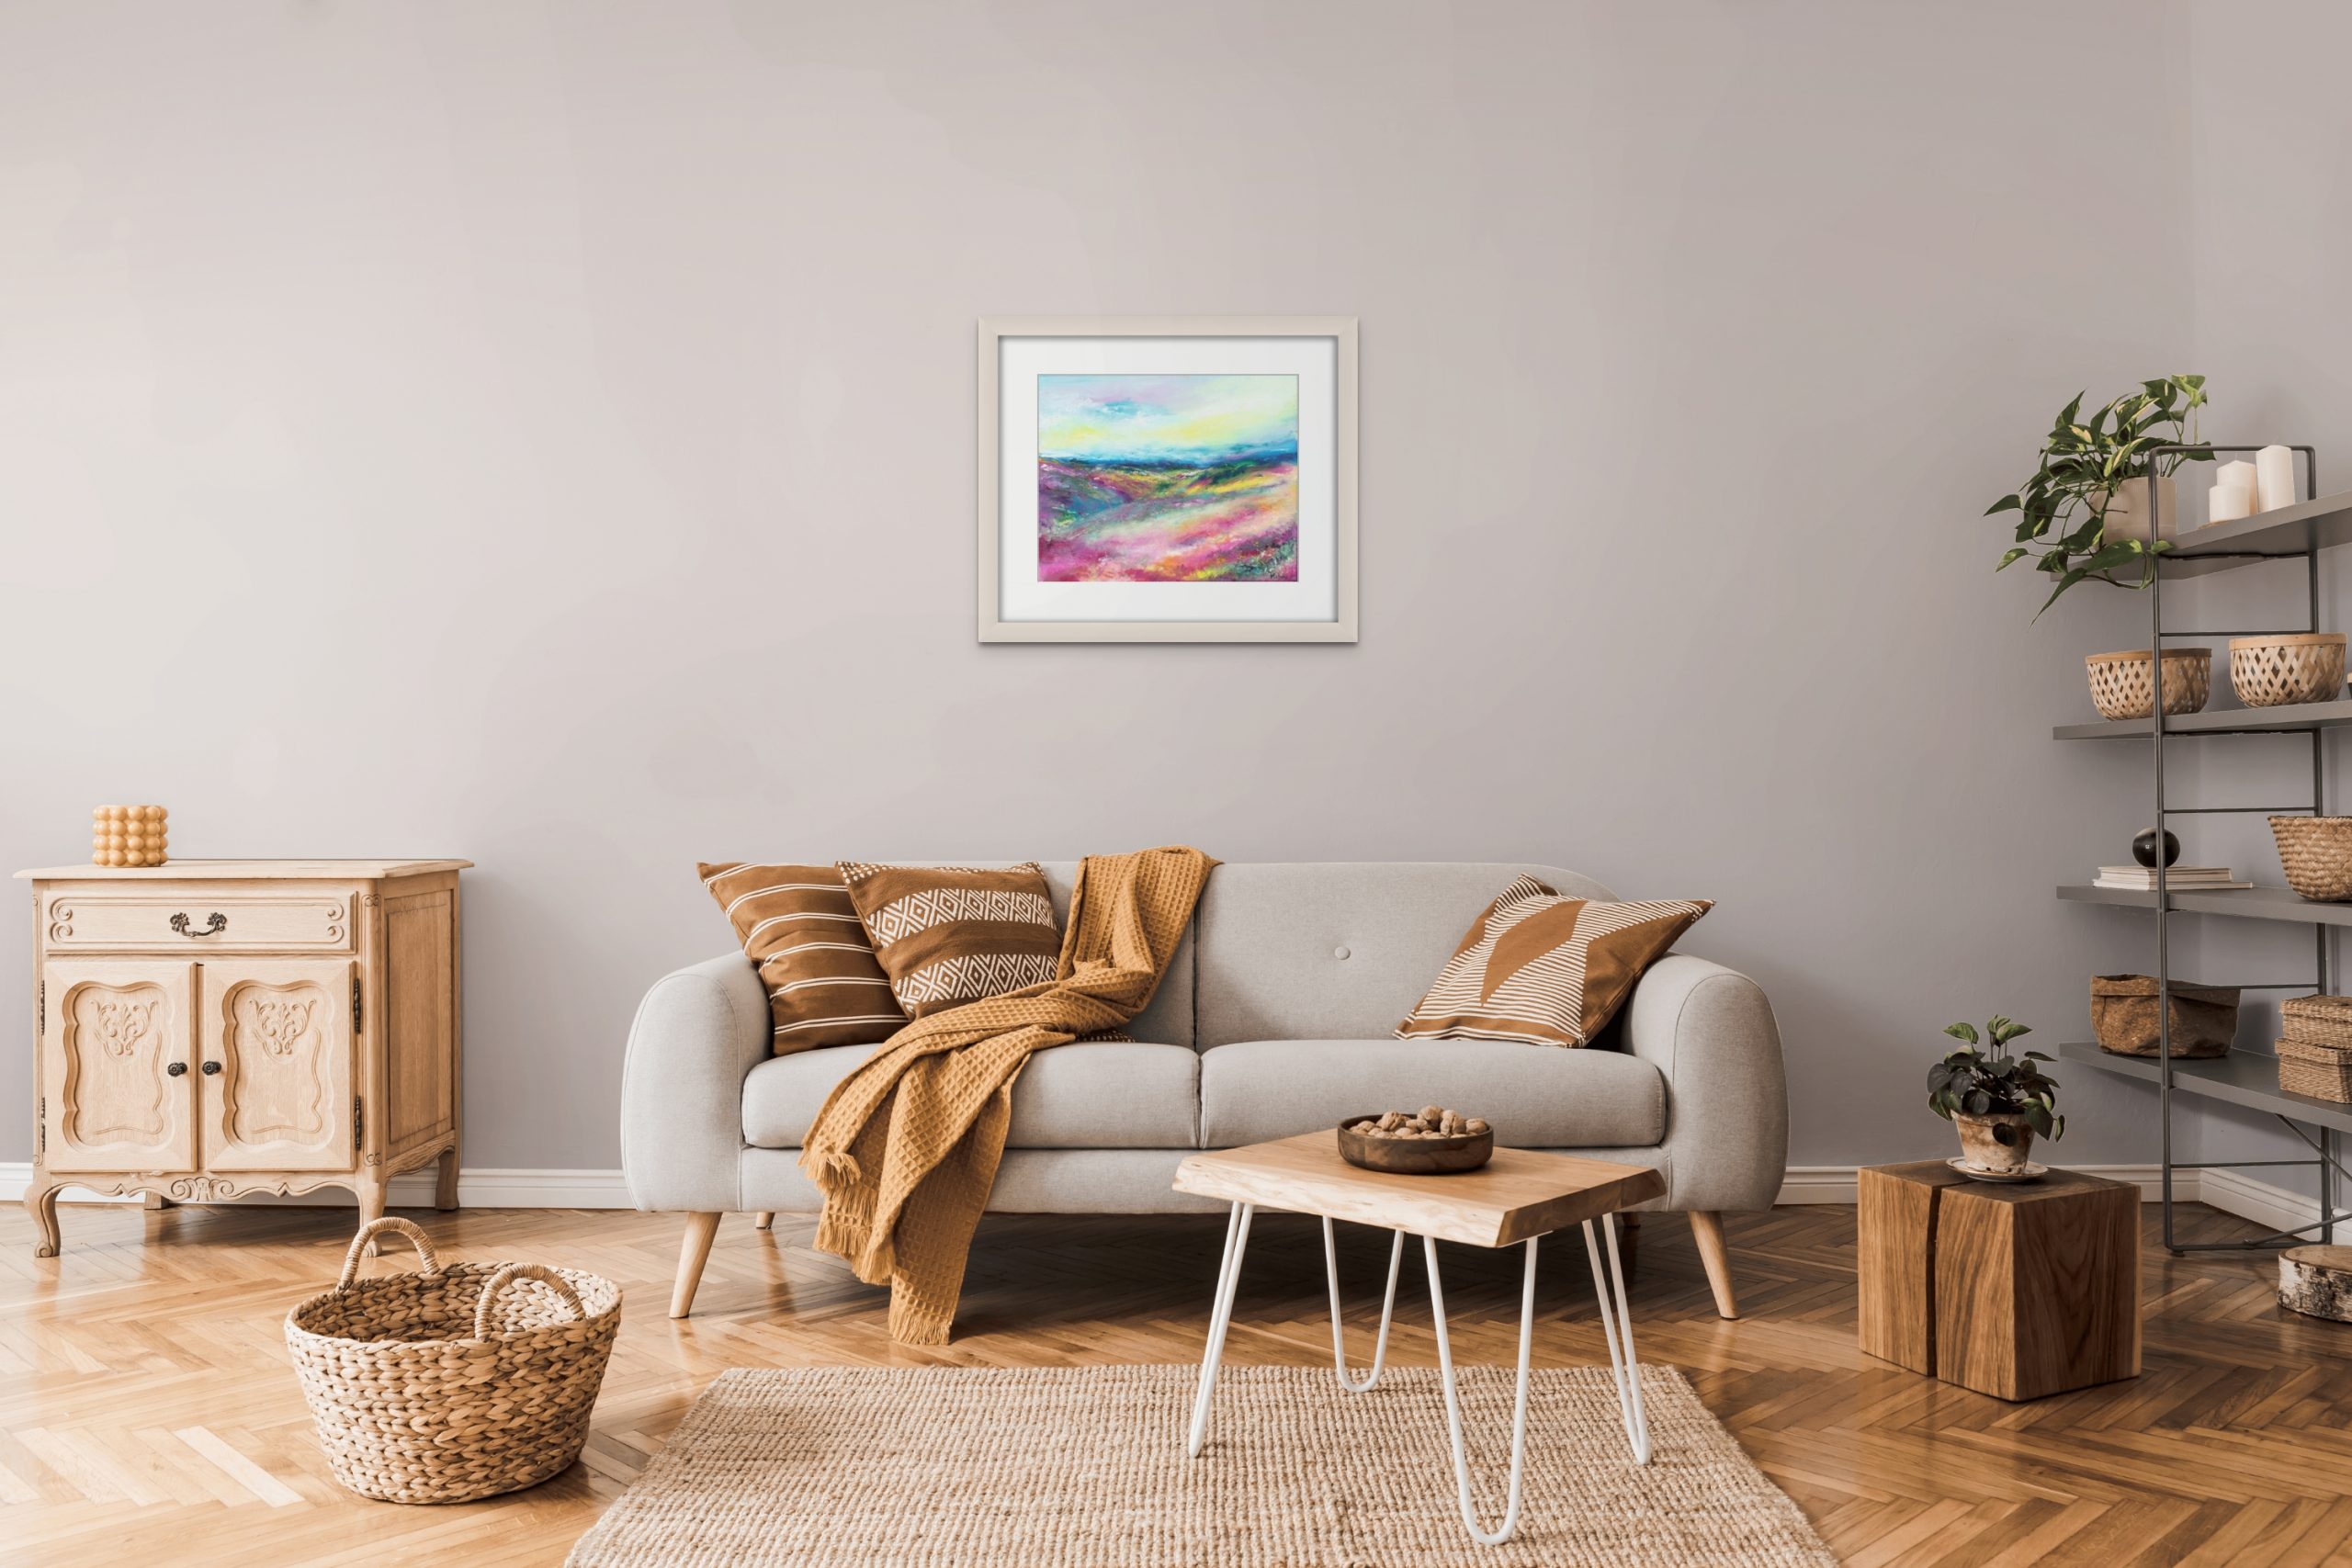 Love Exmoor colourful contemporary landscape painting on paper with frame hanging in living room above settee